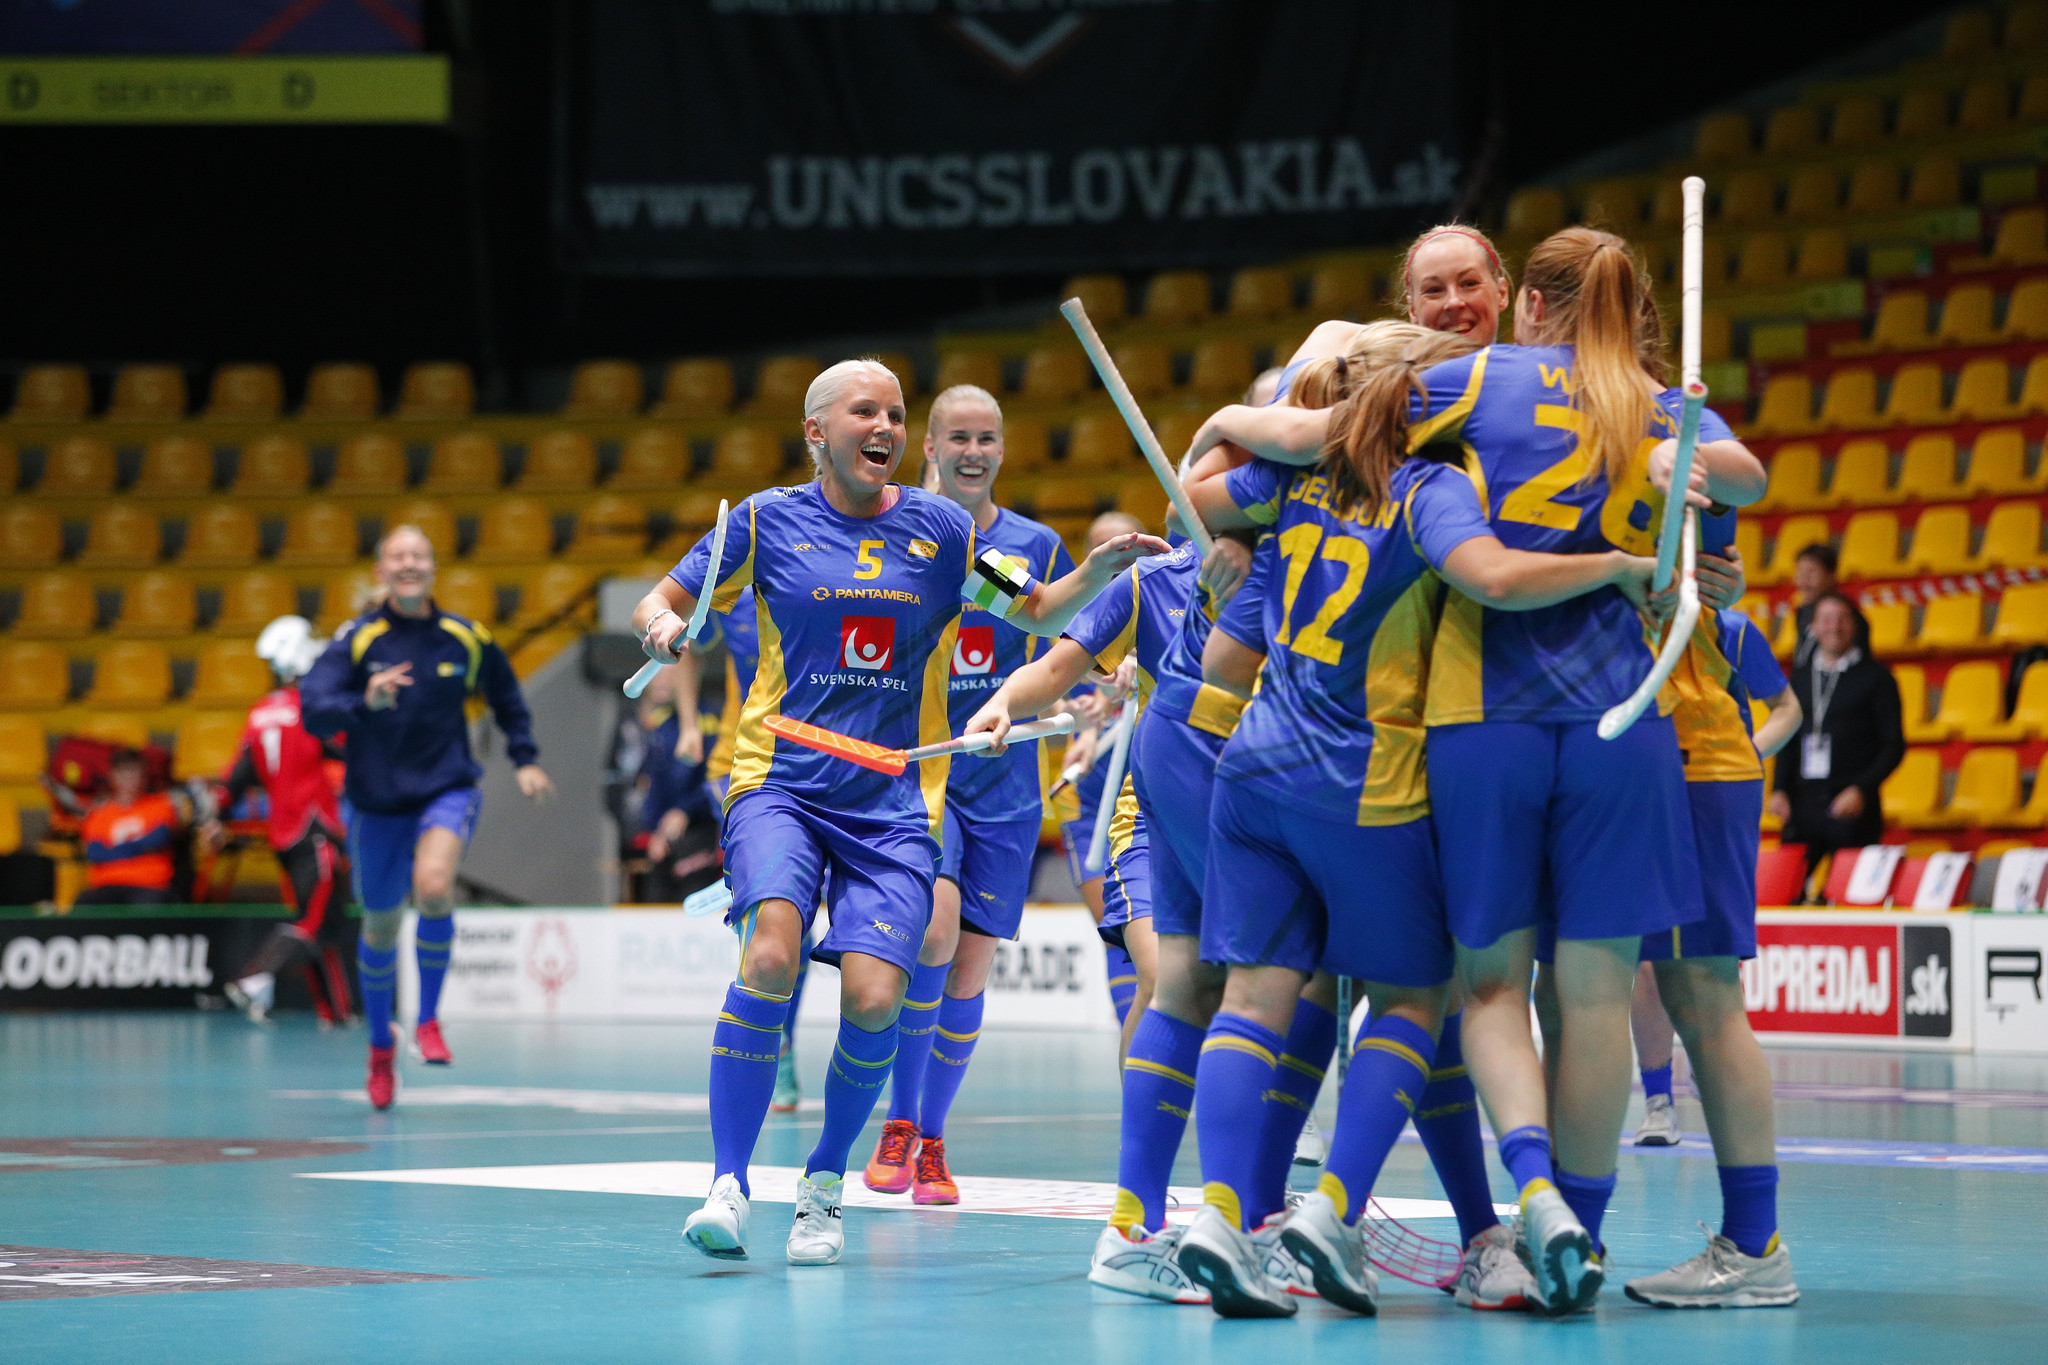 Sweden bring Switzerland back down to earth at the Women's World Floorball Championships